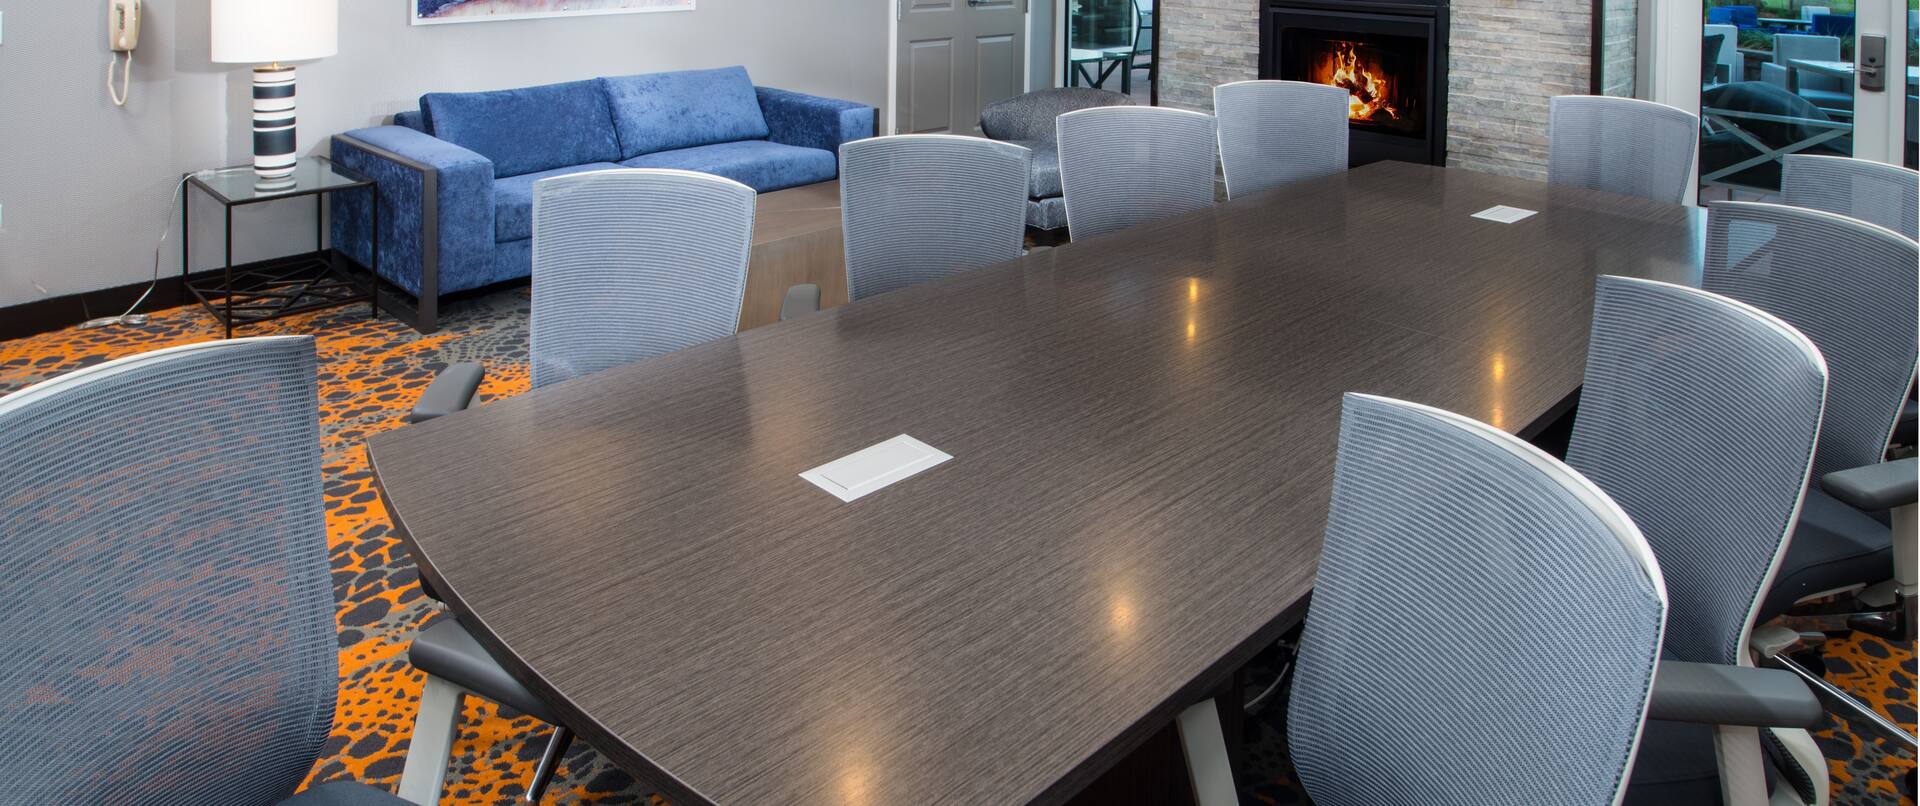 The Board Room Meeting Table